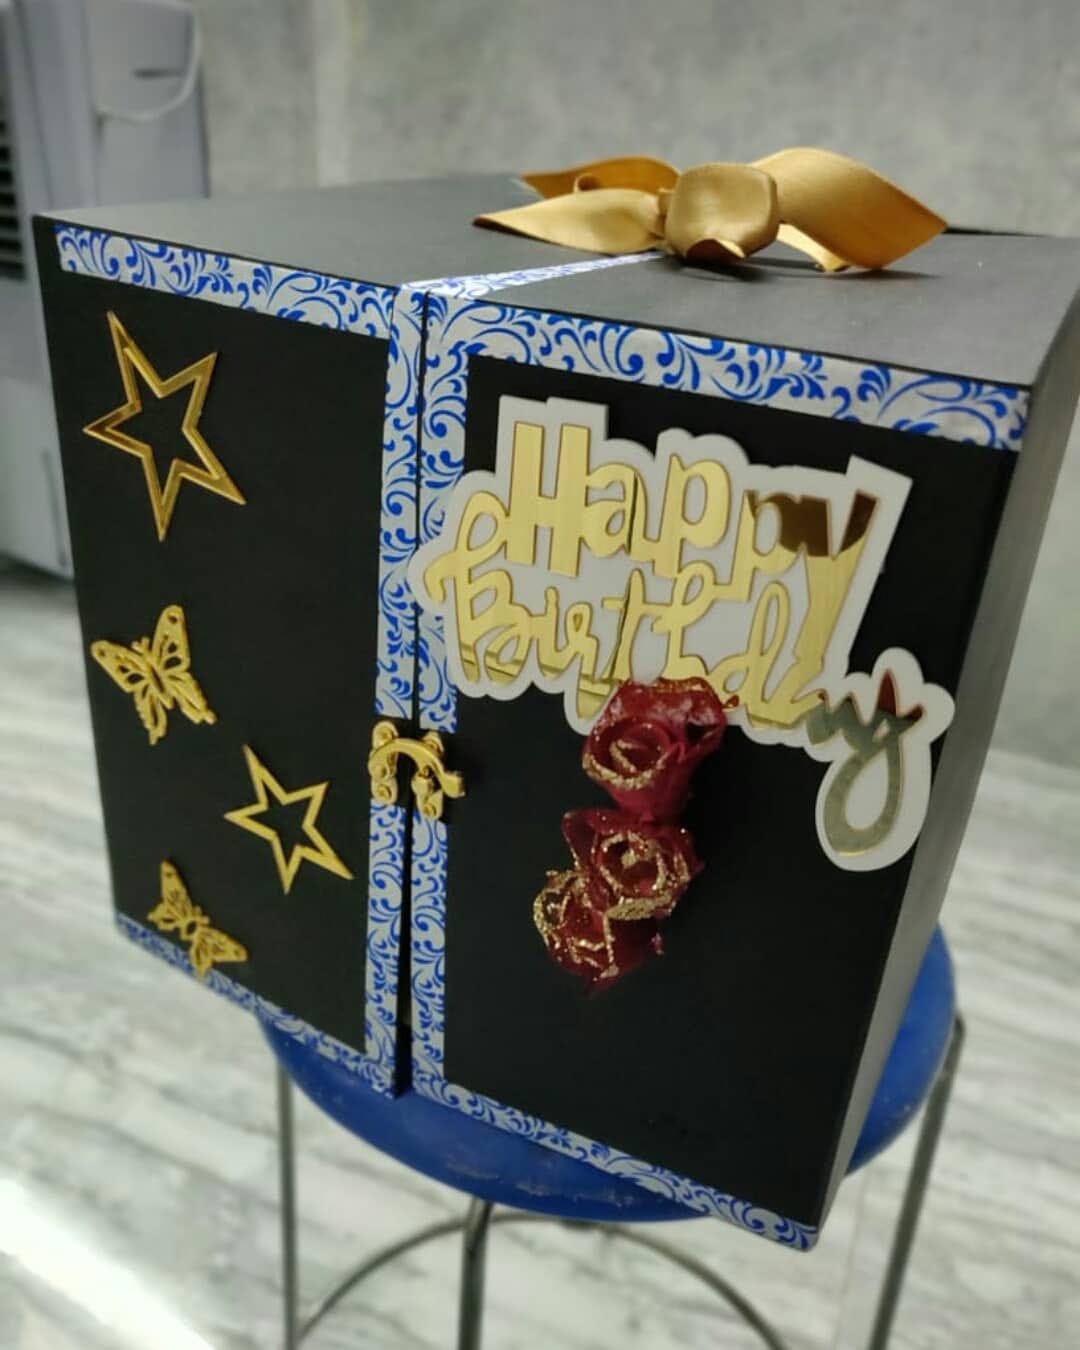 Surprise Box with Cake Designs, Images, Price Near Me